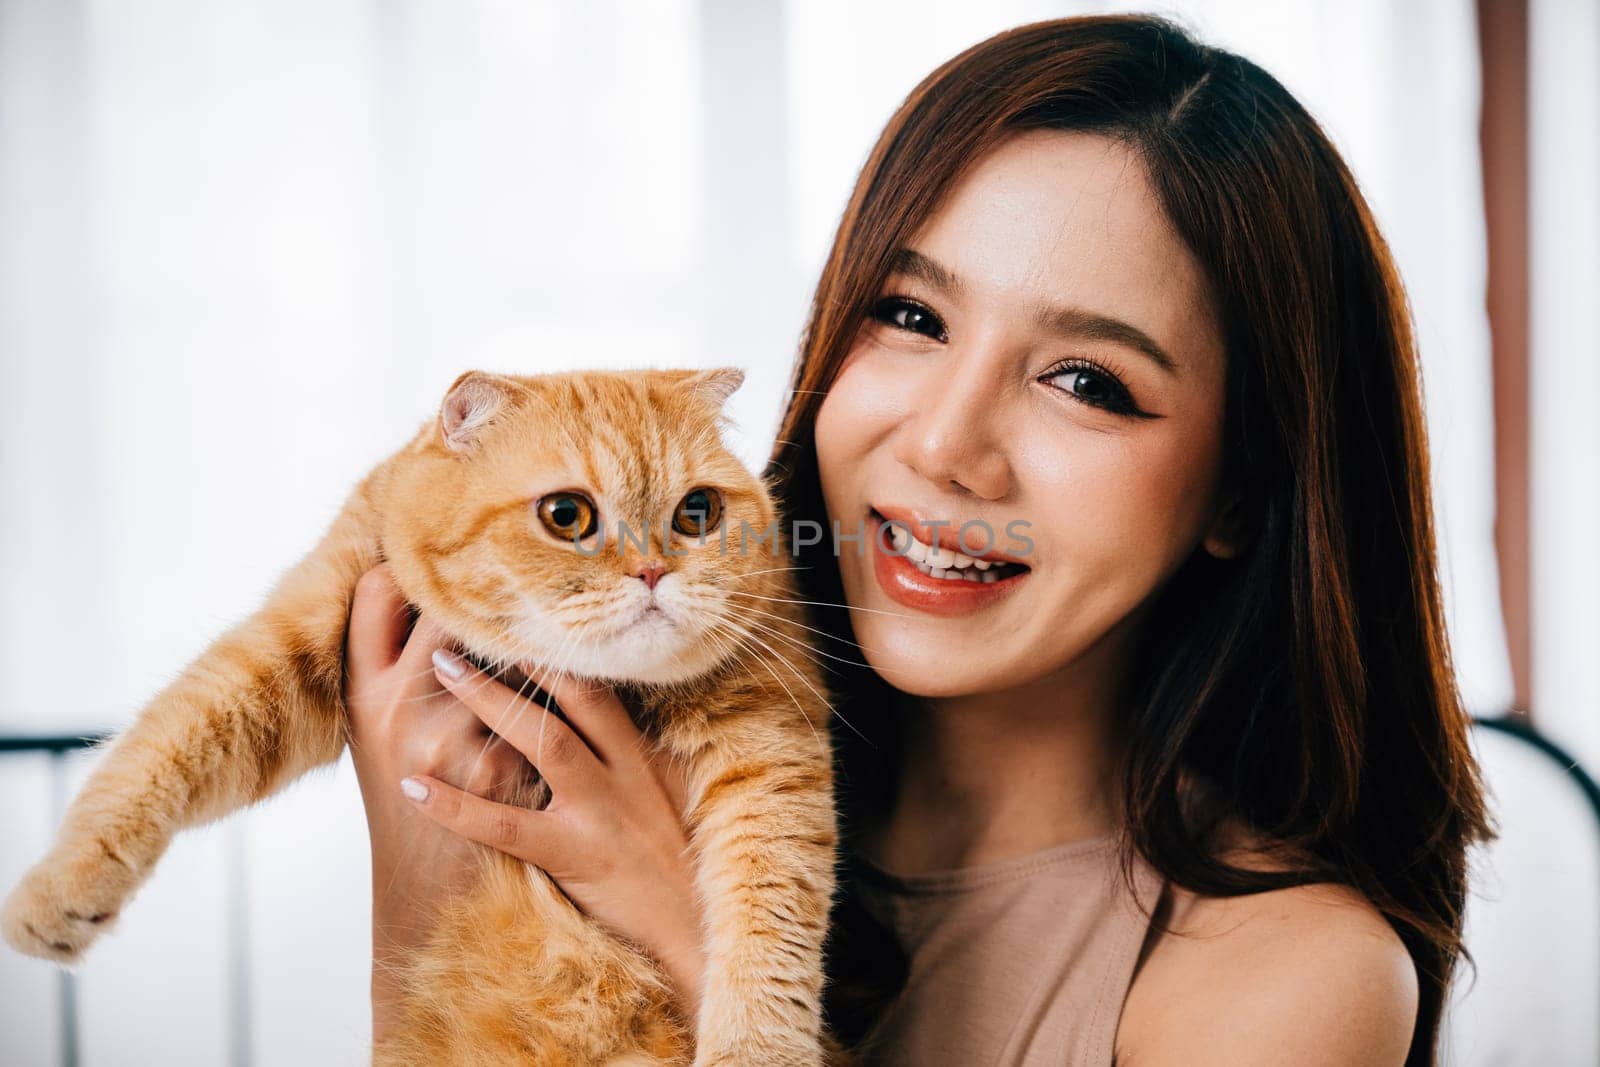 A touching portrait captures a woman's affectionate embrace of her beloved orange Scottish Fold cat. The image radiates joy, love, and the special connection between them.